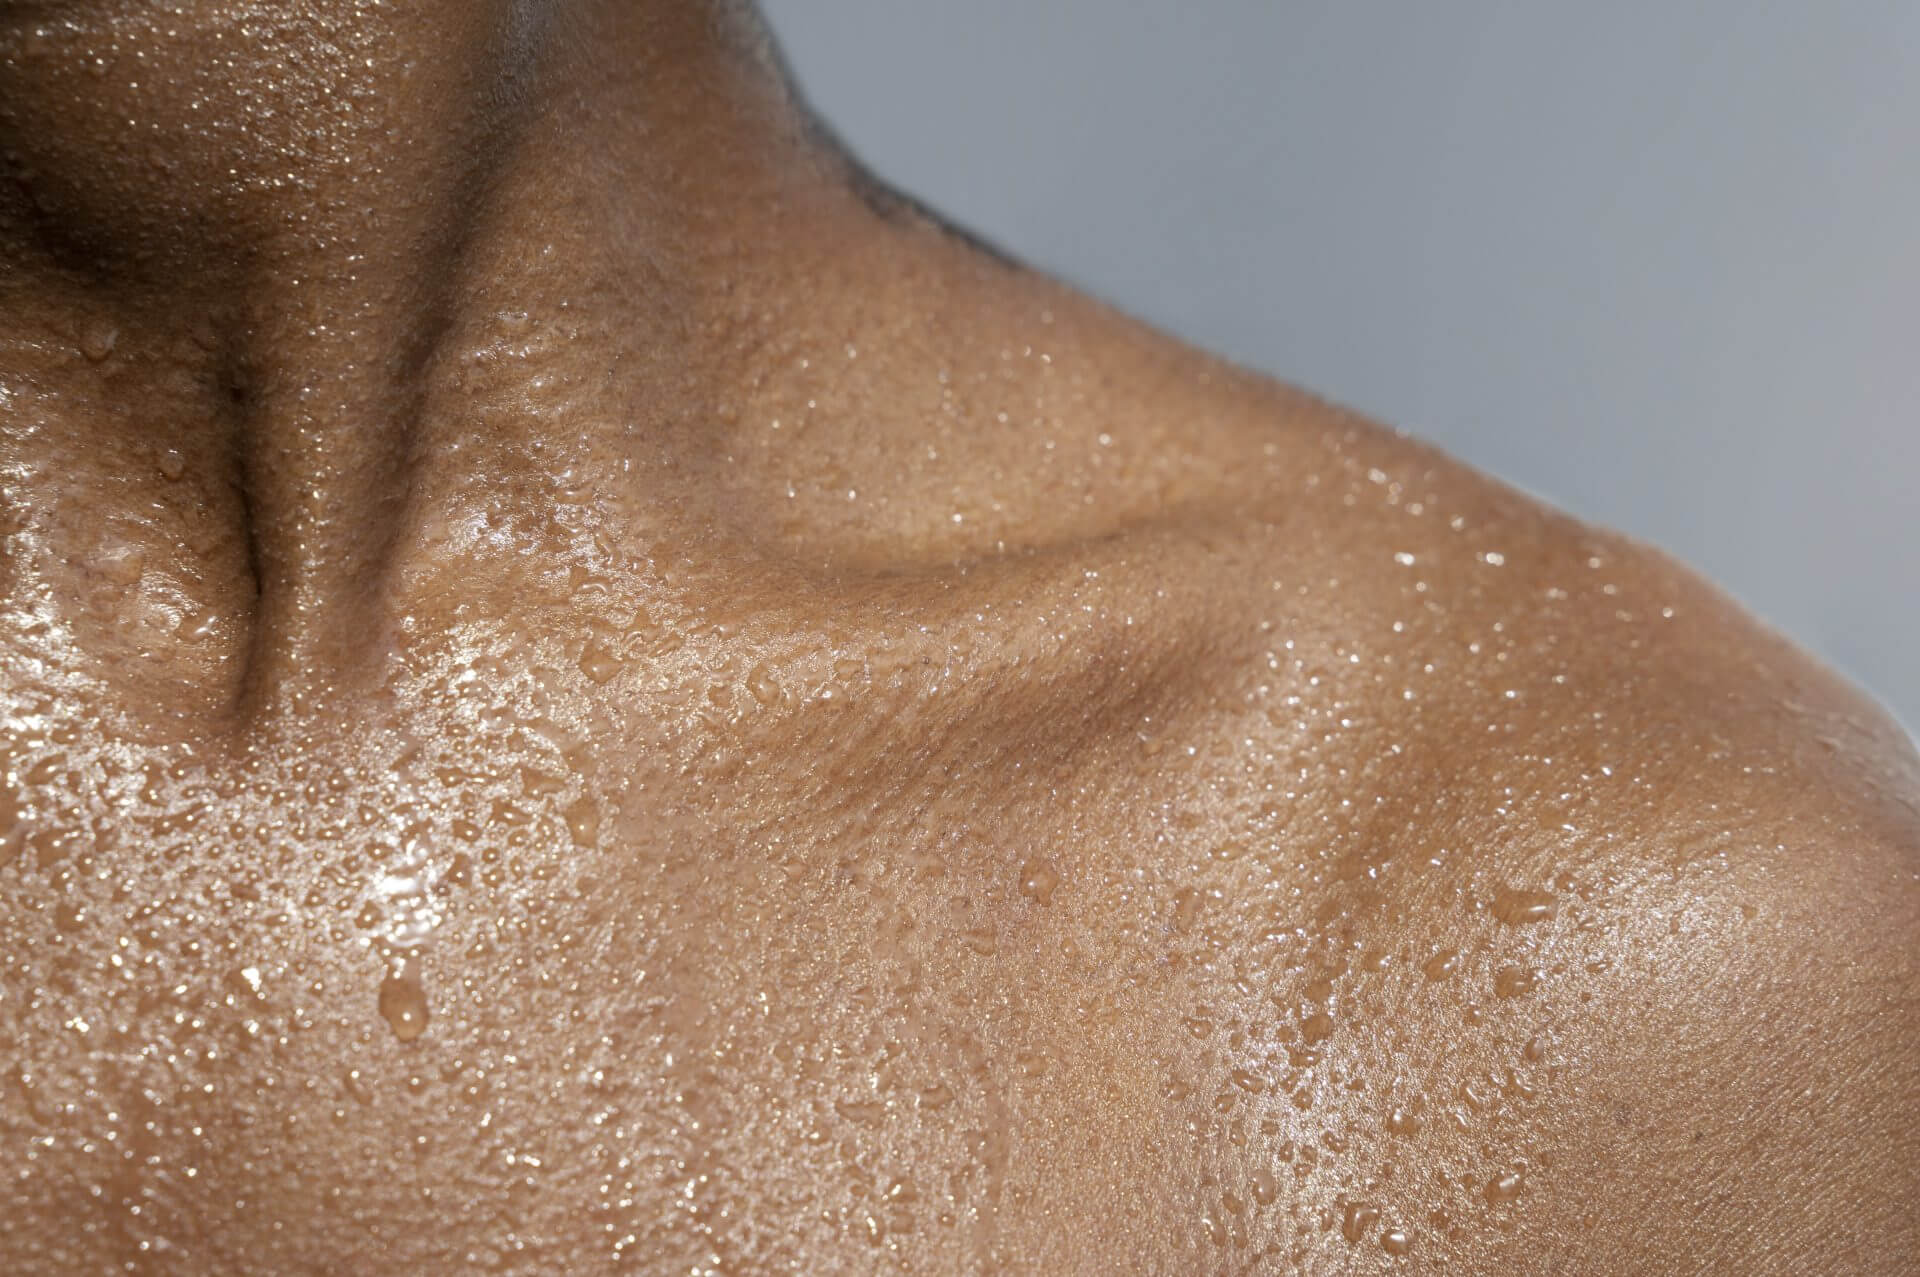 Close up of body with oily skin